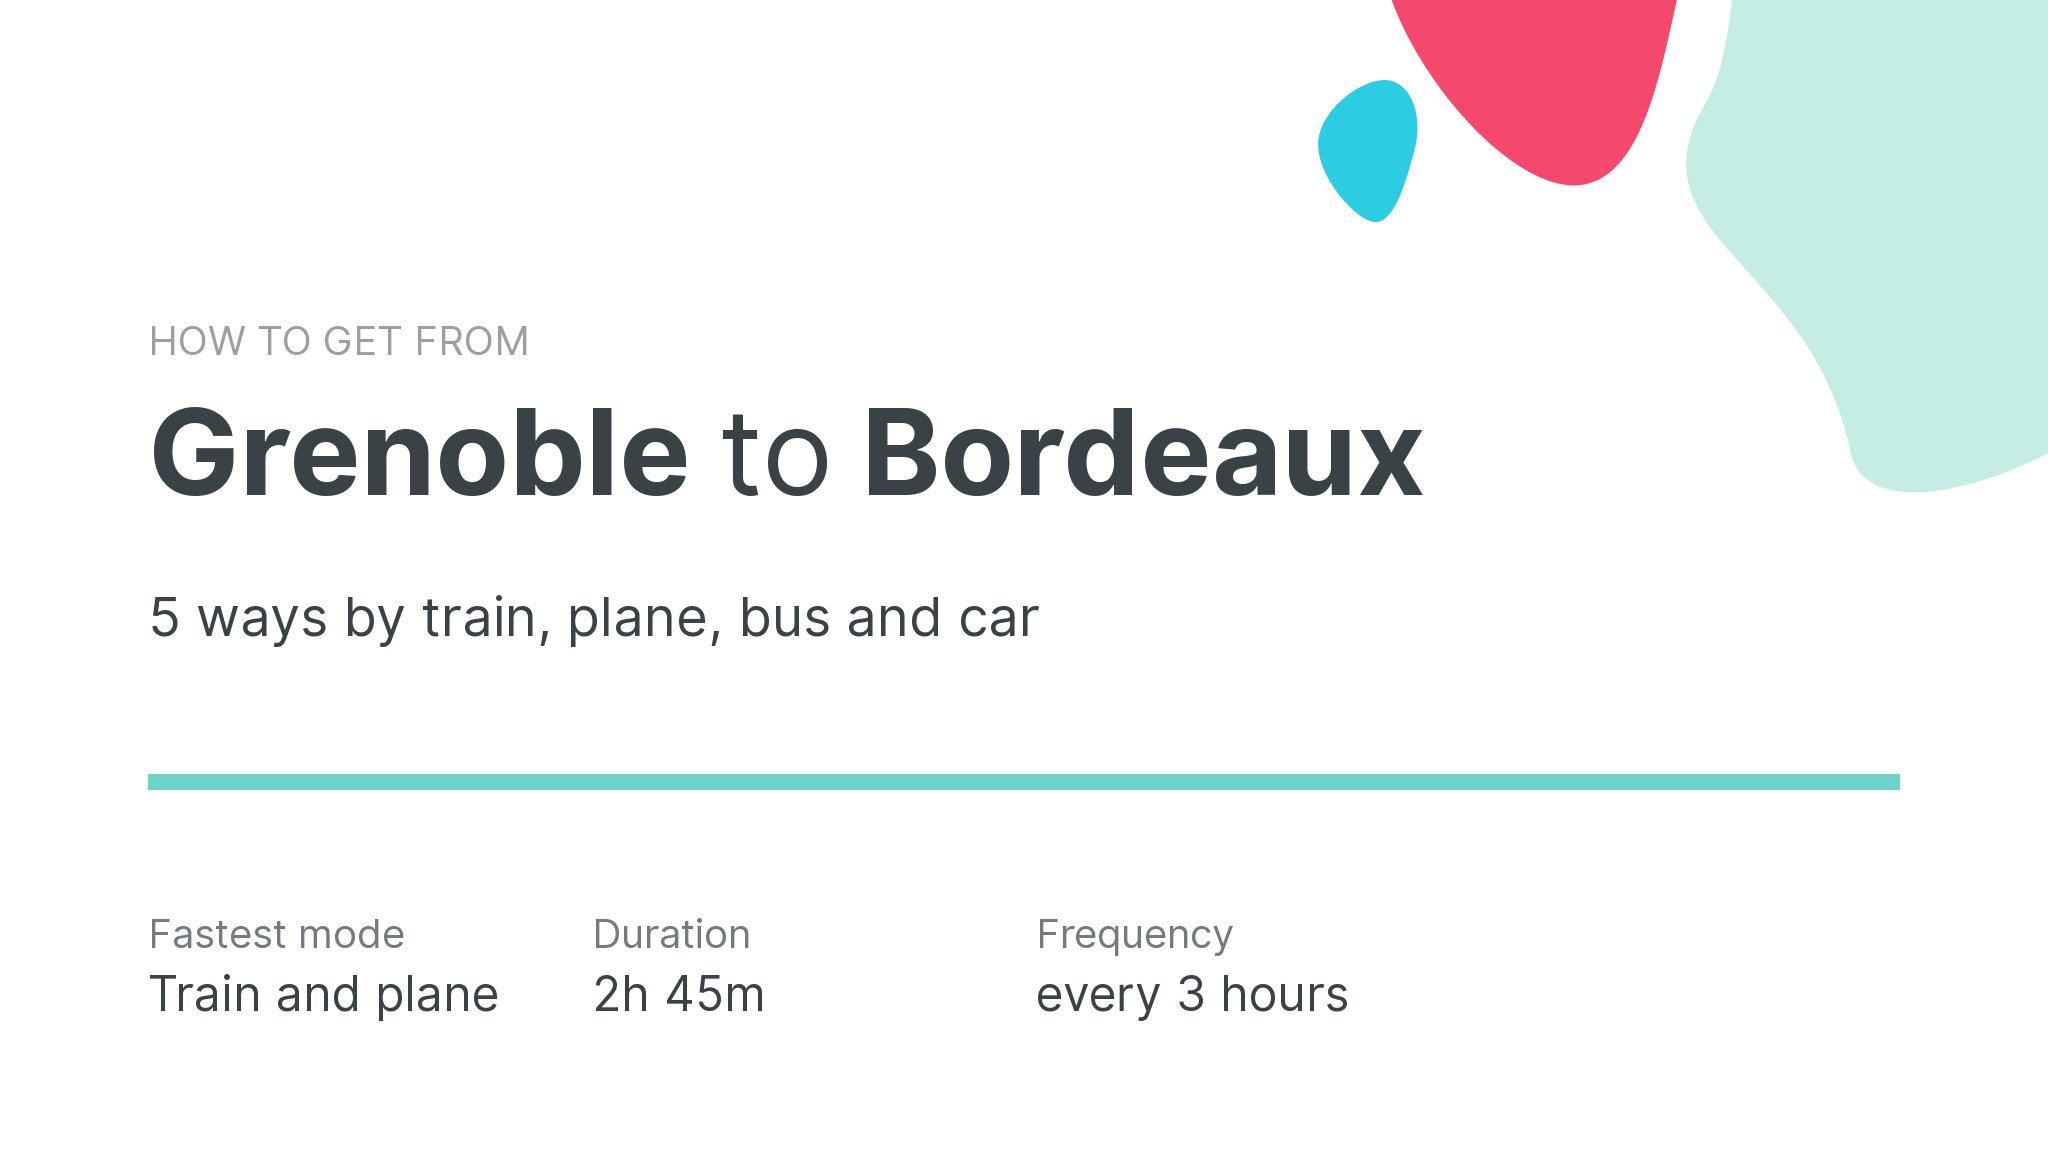 How do I get from Grenoble to Bordeaux